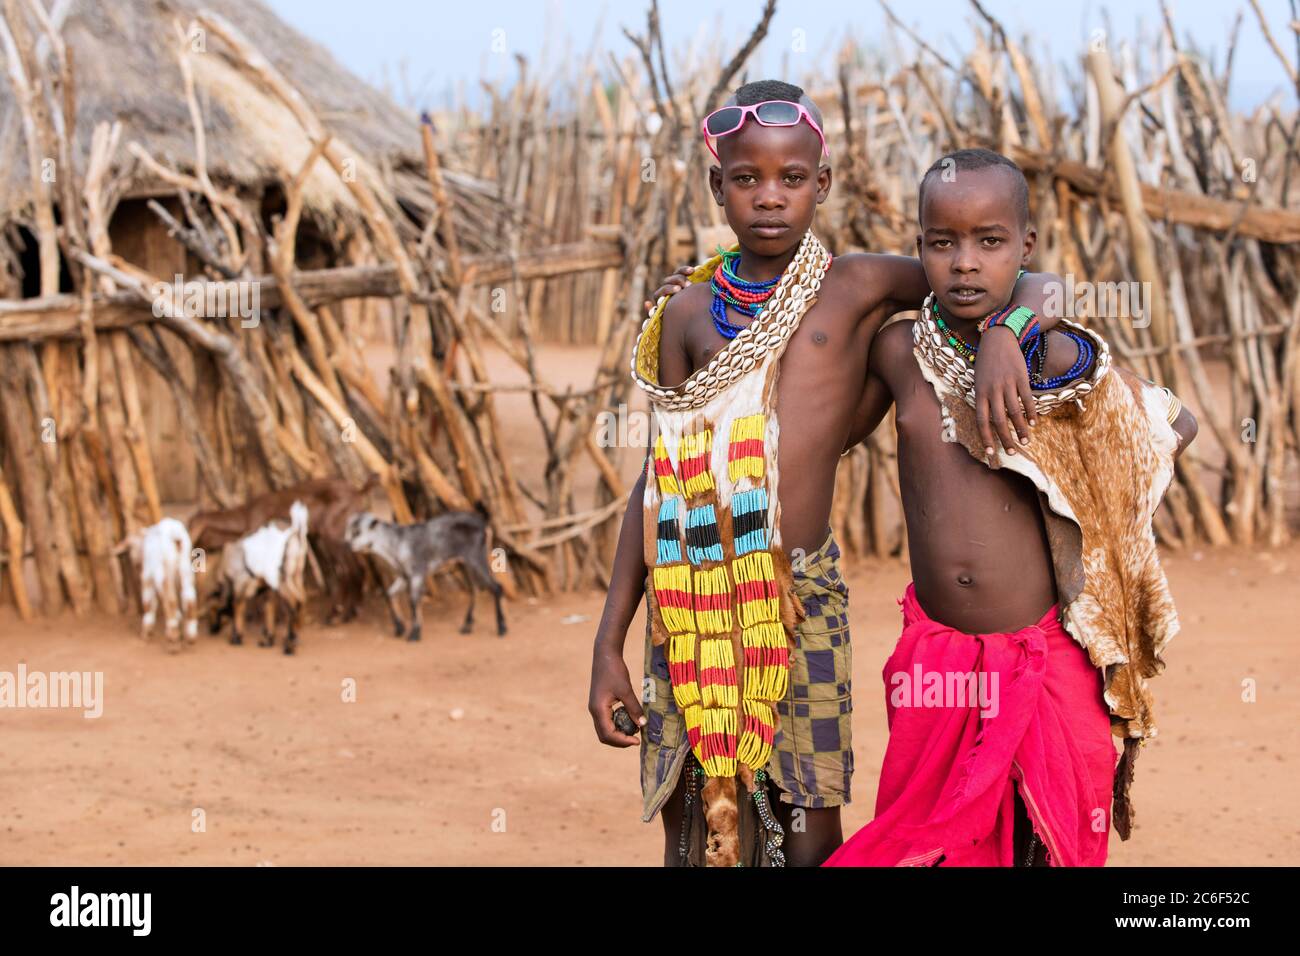 Two black children of the Hamar / Hamer tribe in traditional dress in the village Turmi, Omo River valley, Debub Omo Zone, Southern Ethiopia, Africa Stock Photo